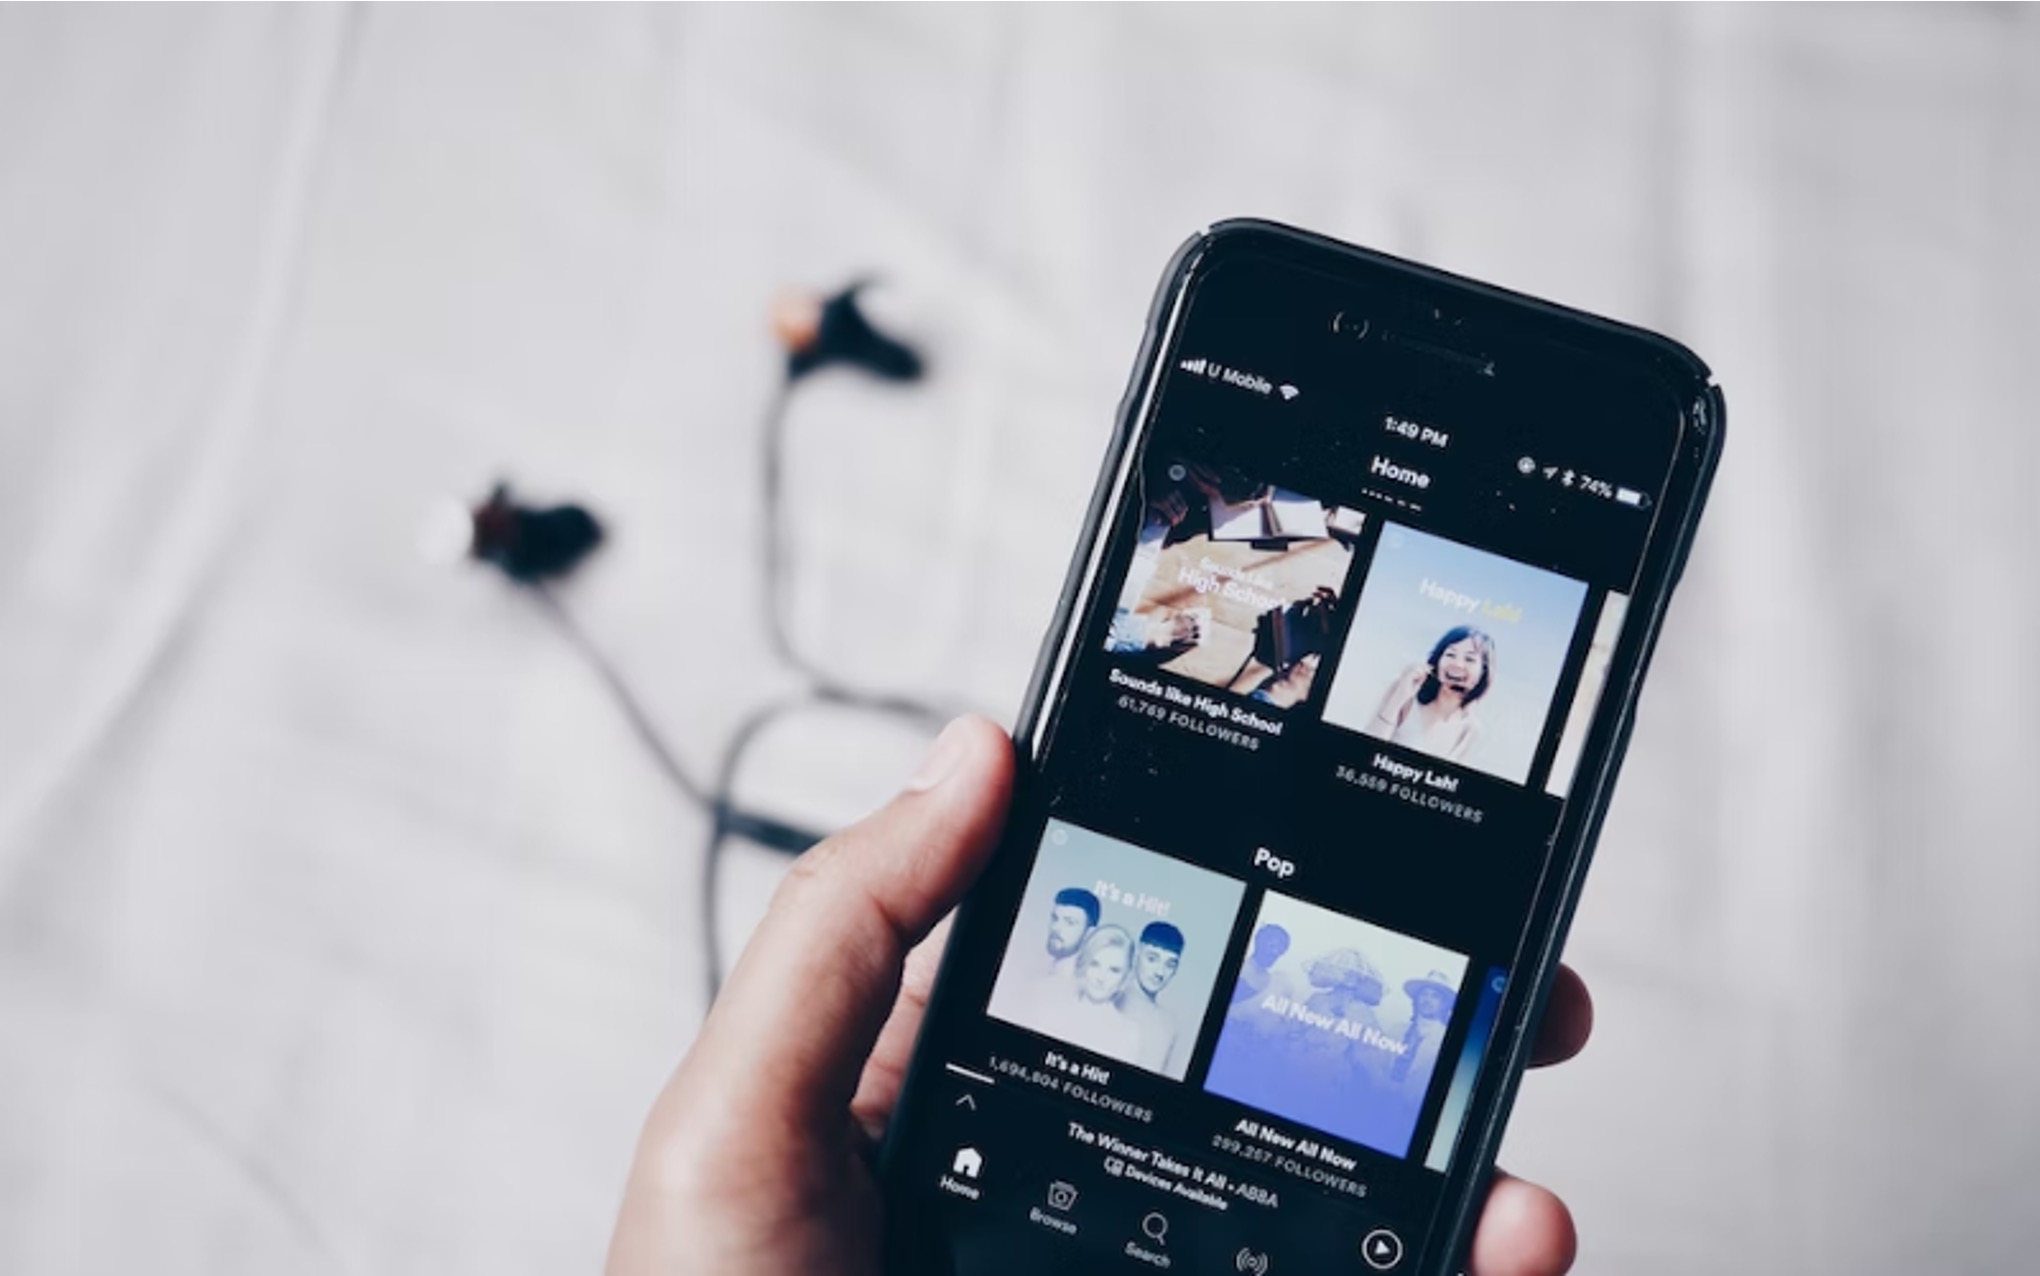 how-to-turn-off-shuffle-on-spotify-mobile